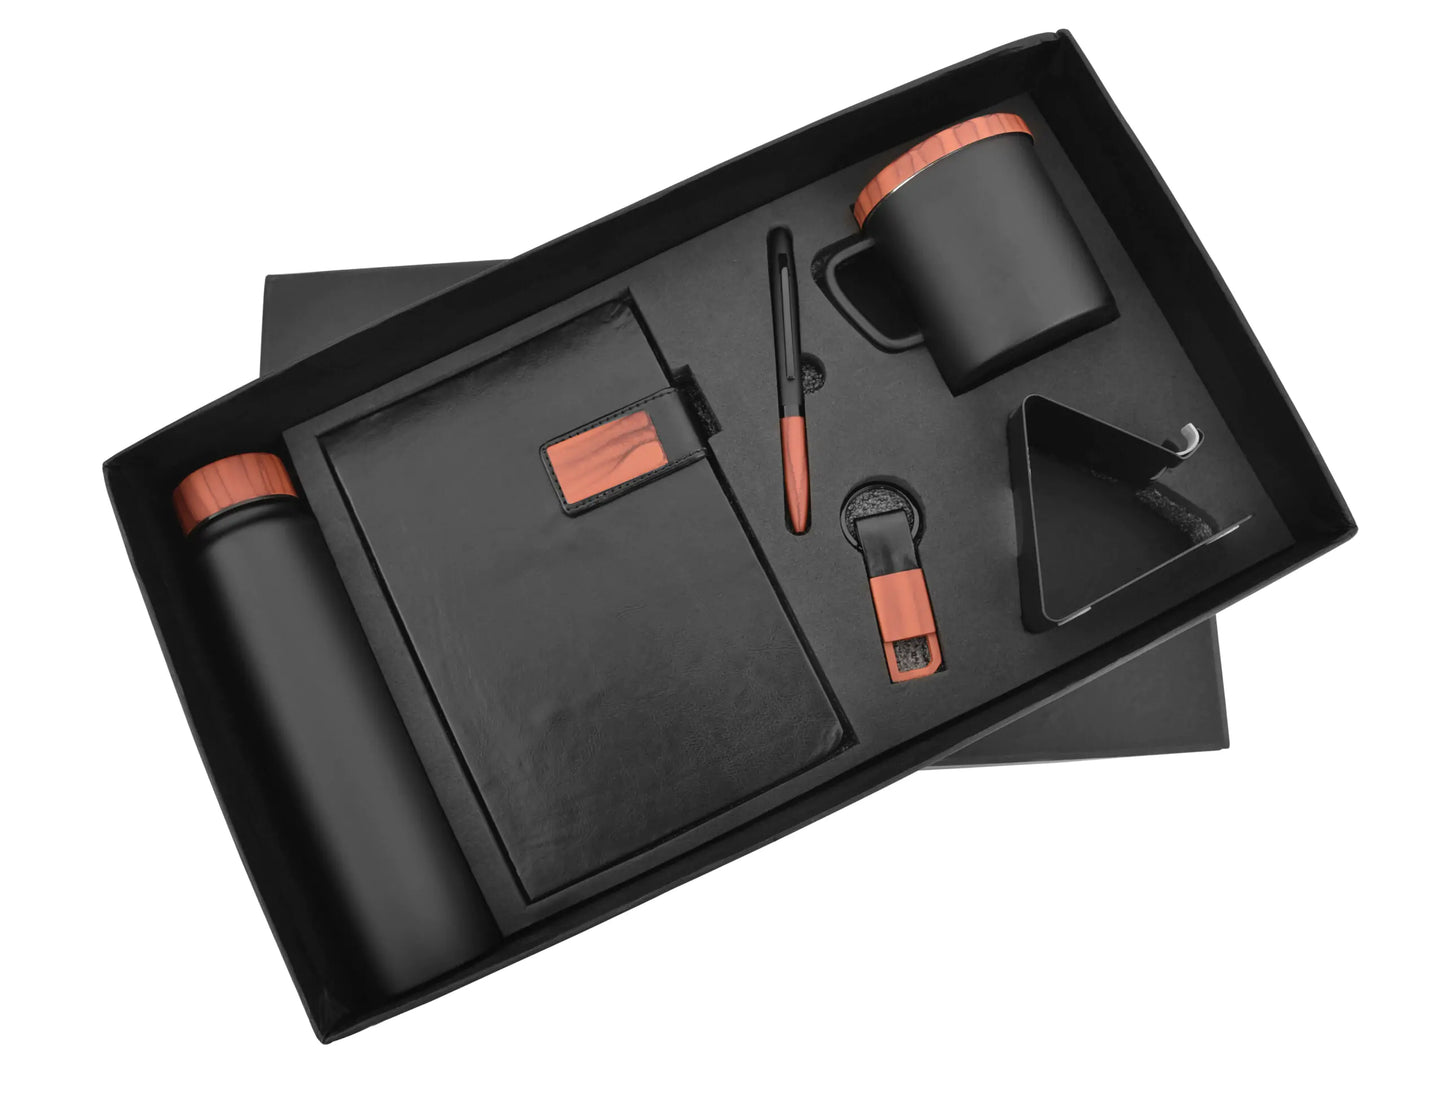 Notebook Diary, Keychain, Bottle, Mug, Mobile Stand and Pen 6in1 Combo Gift Set - For Employee Joining Kit, Corporate, Client or Dealer Gifting, Events Promotional Freebie JKSR169